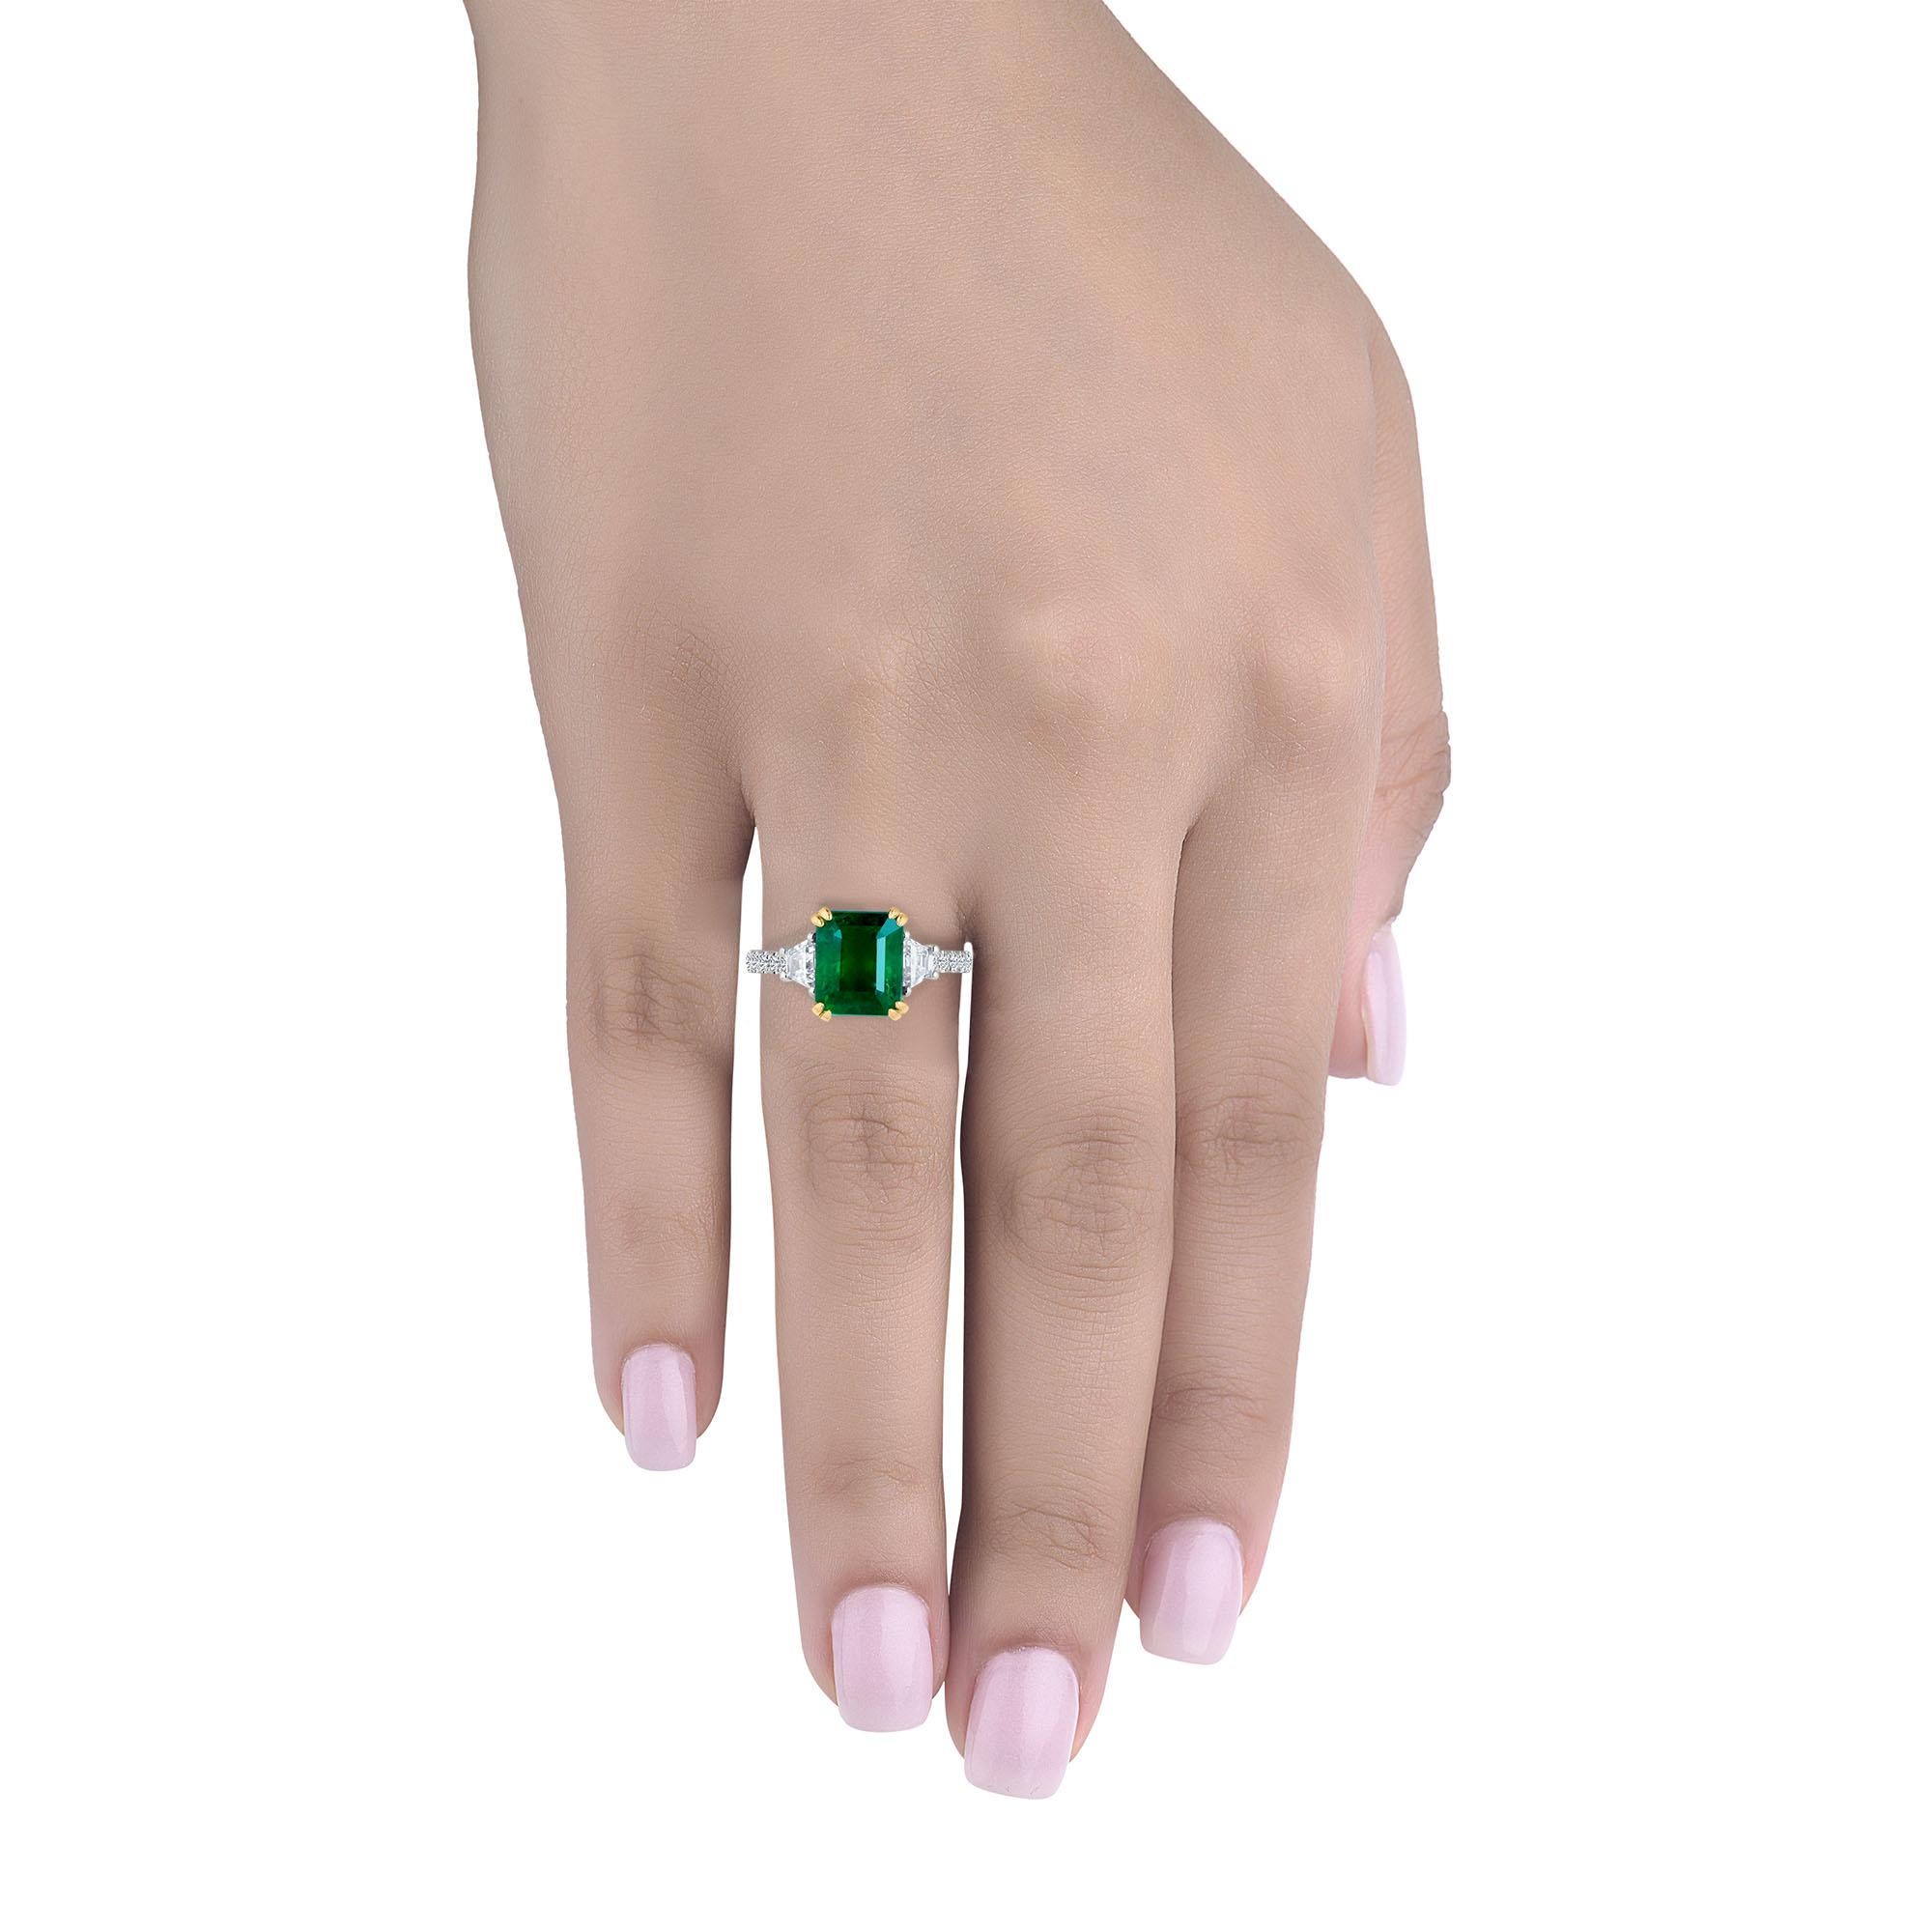 Hand made in the Emilio Jewelry Factory, A gorgeous vivid green certified green Emerald cut Zambian Emerald 3.29 Carats set in the center. The emerald is fairly clean and completely eye clean. This ring has a big look for the money. It is a high